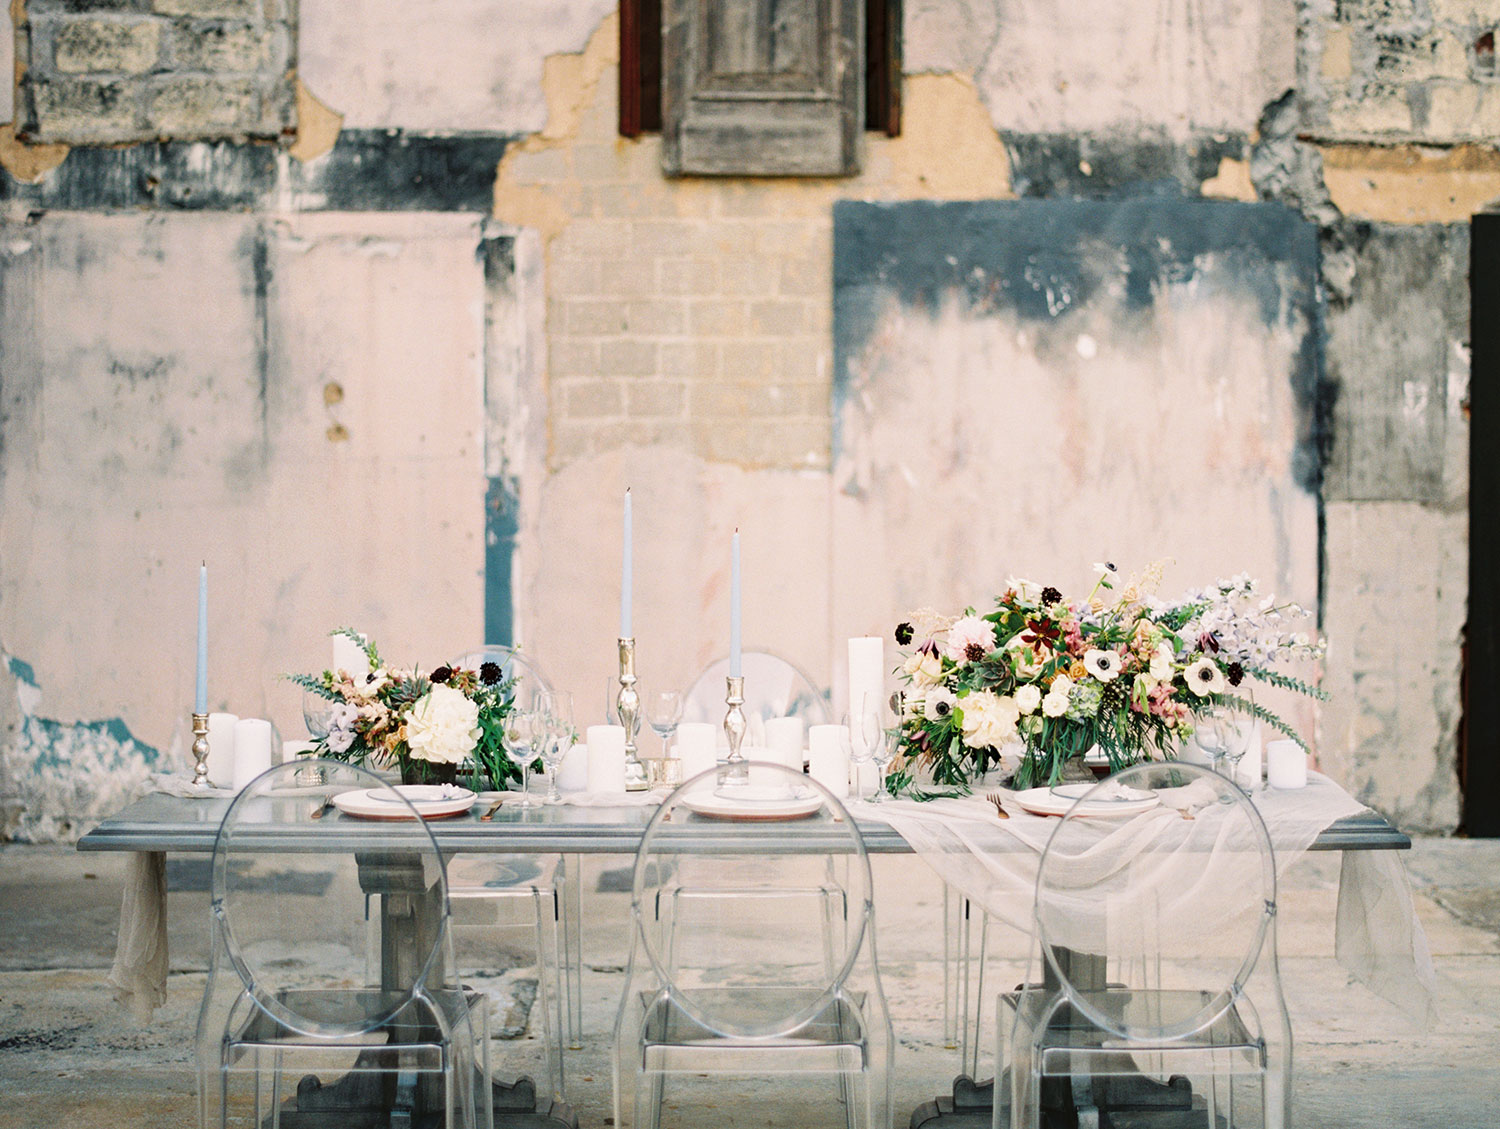 Grey farm table with a white runner and moody flowers